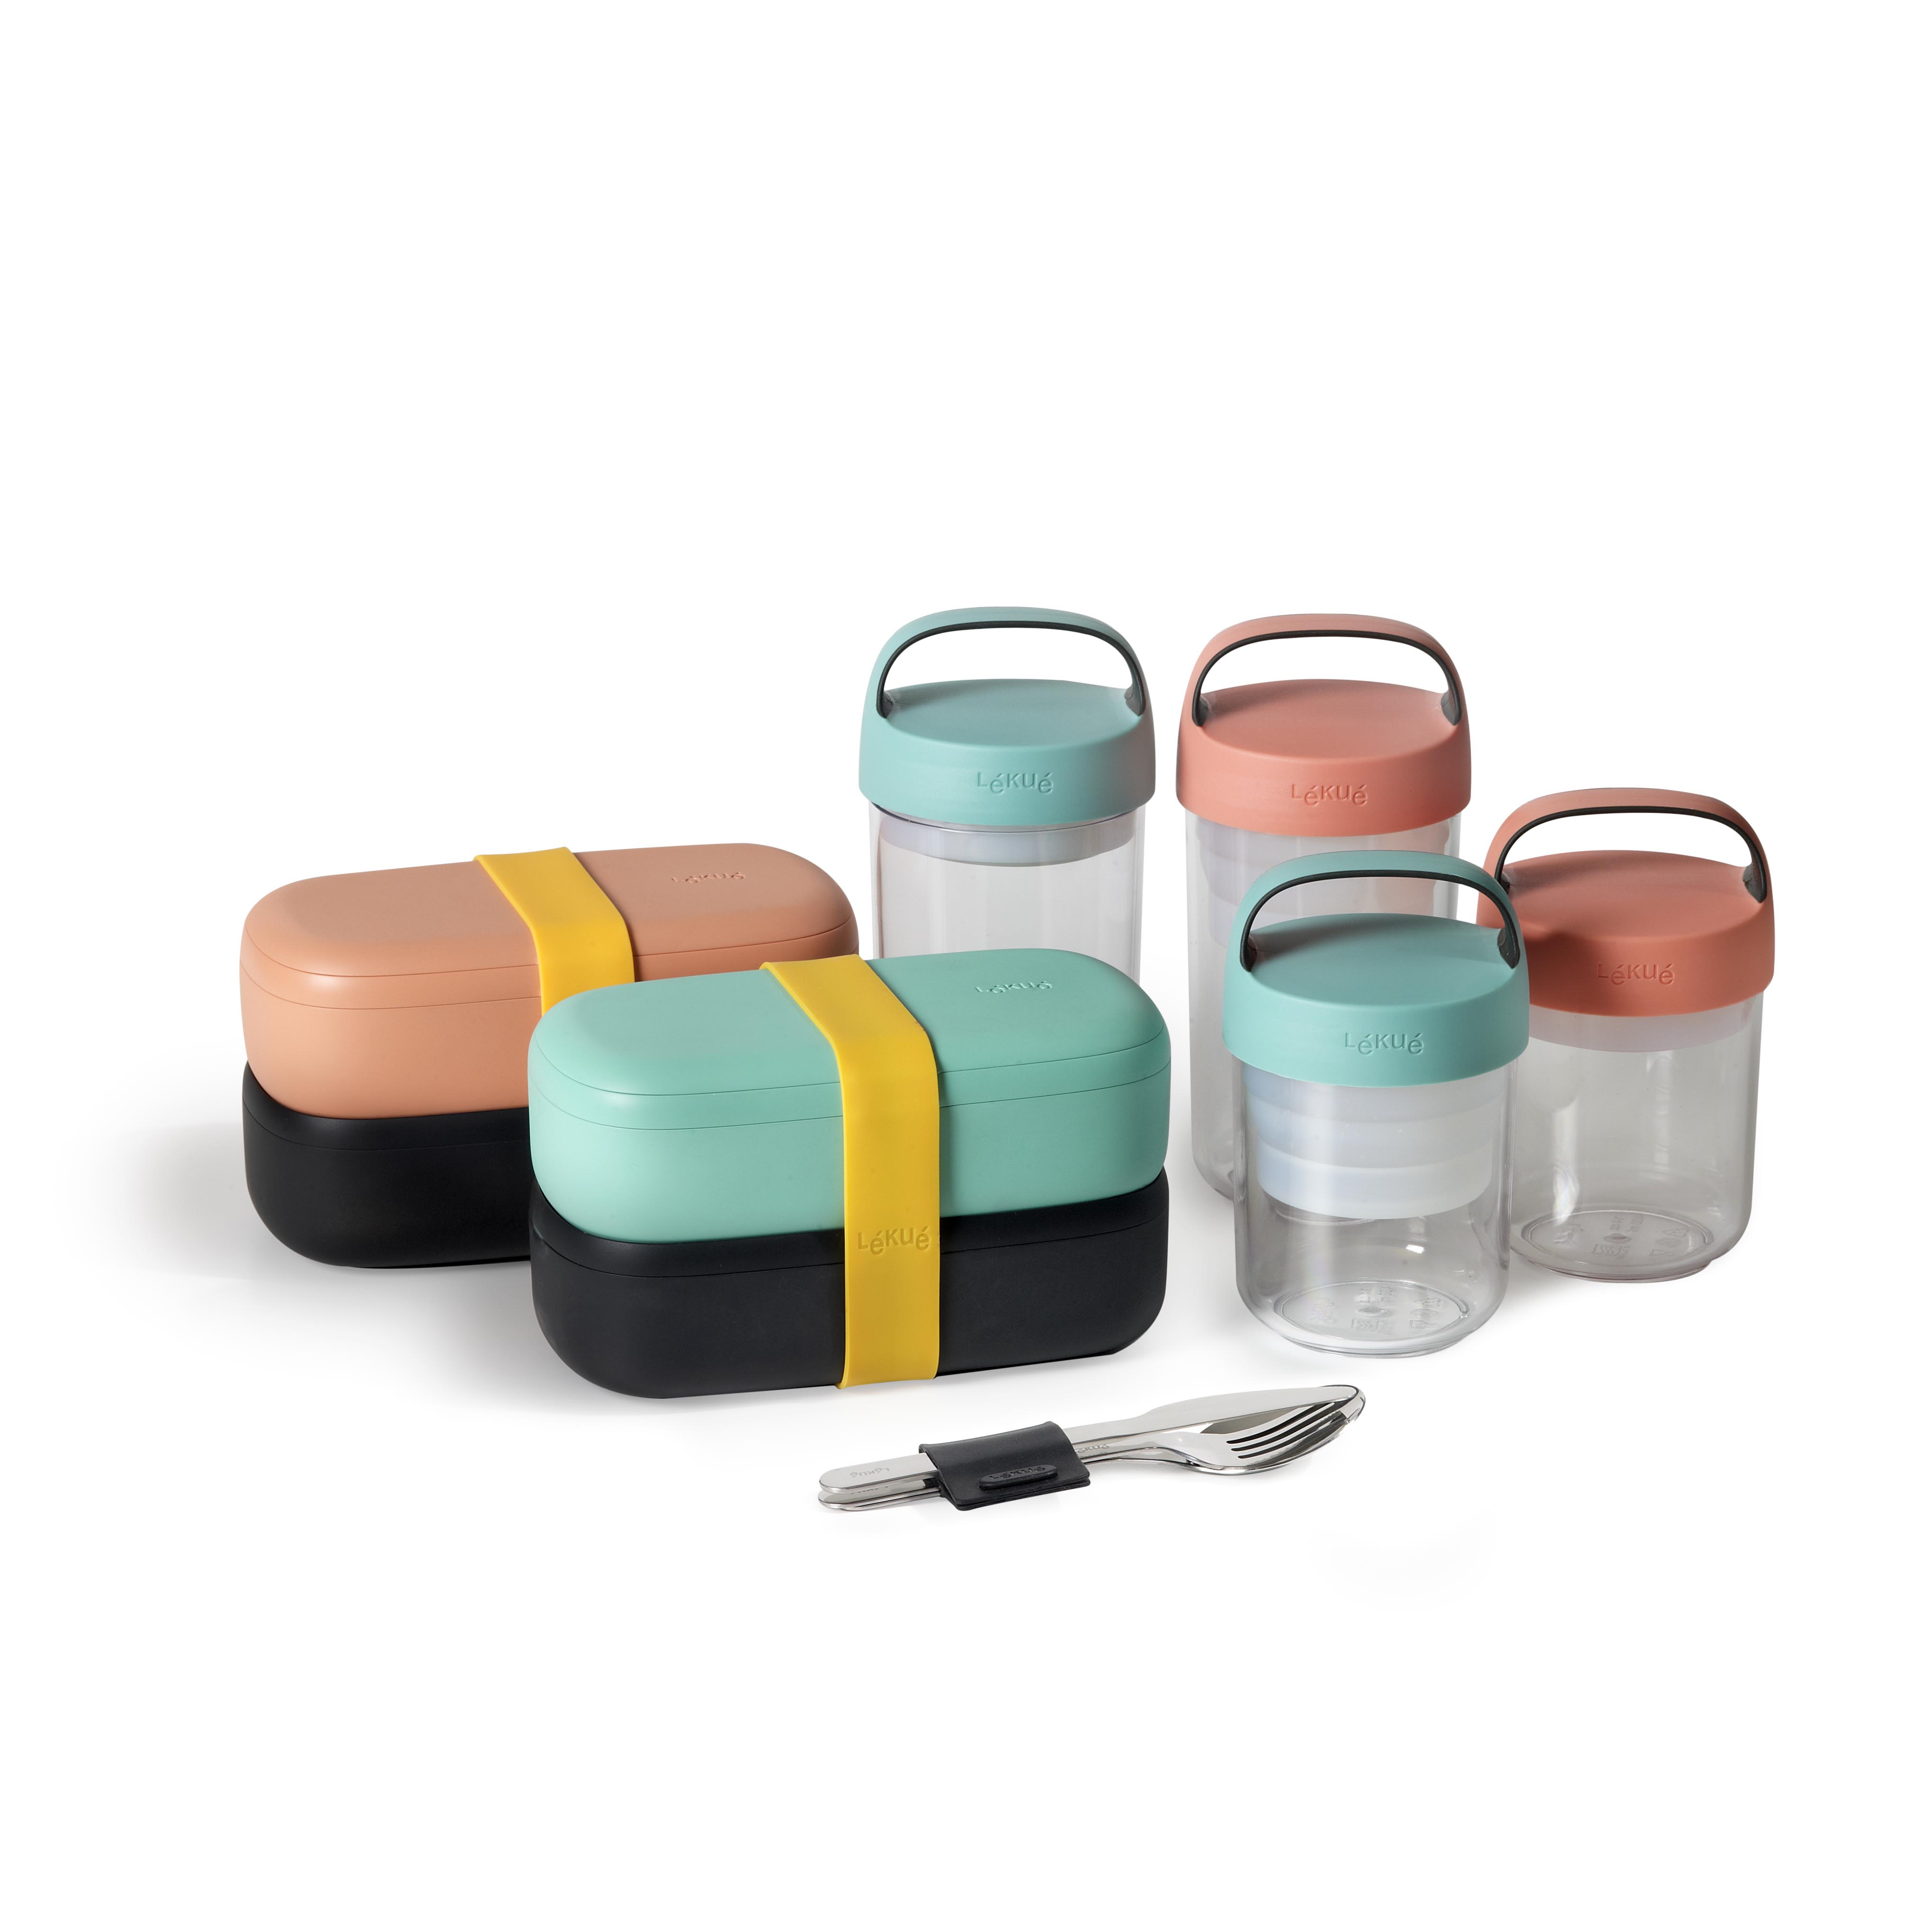 The Lunch to Go and Jar to Go items are leakproof containers for taking lunch to go.  Available in turquoise and coral colors.